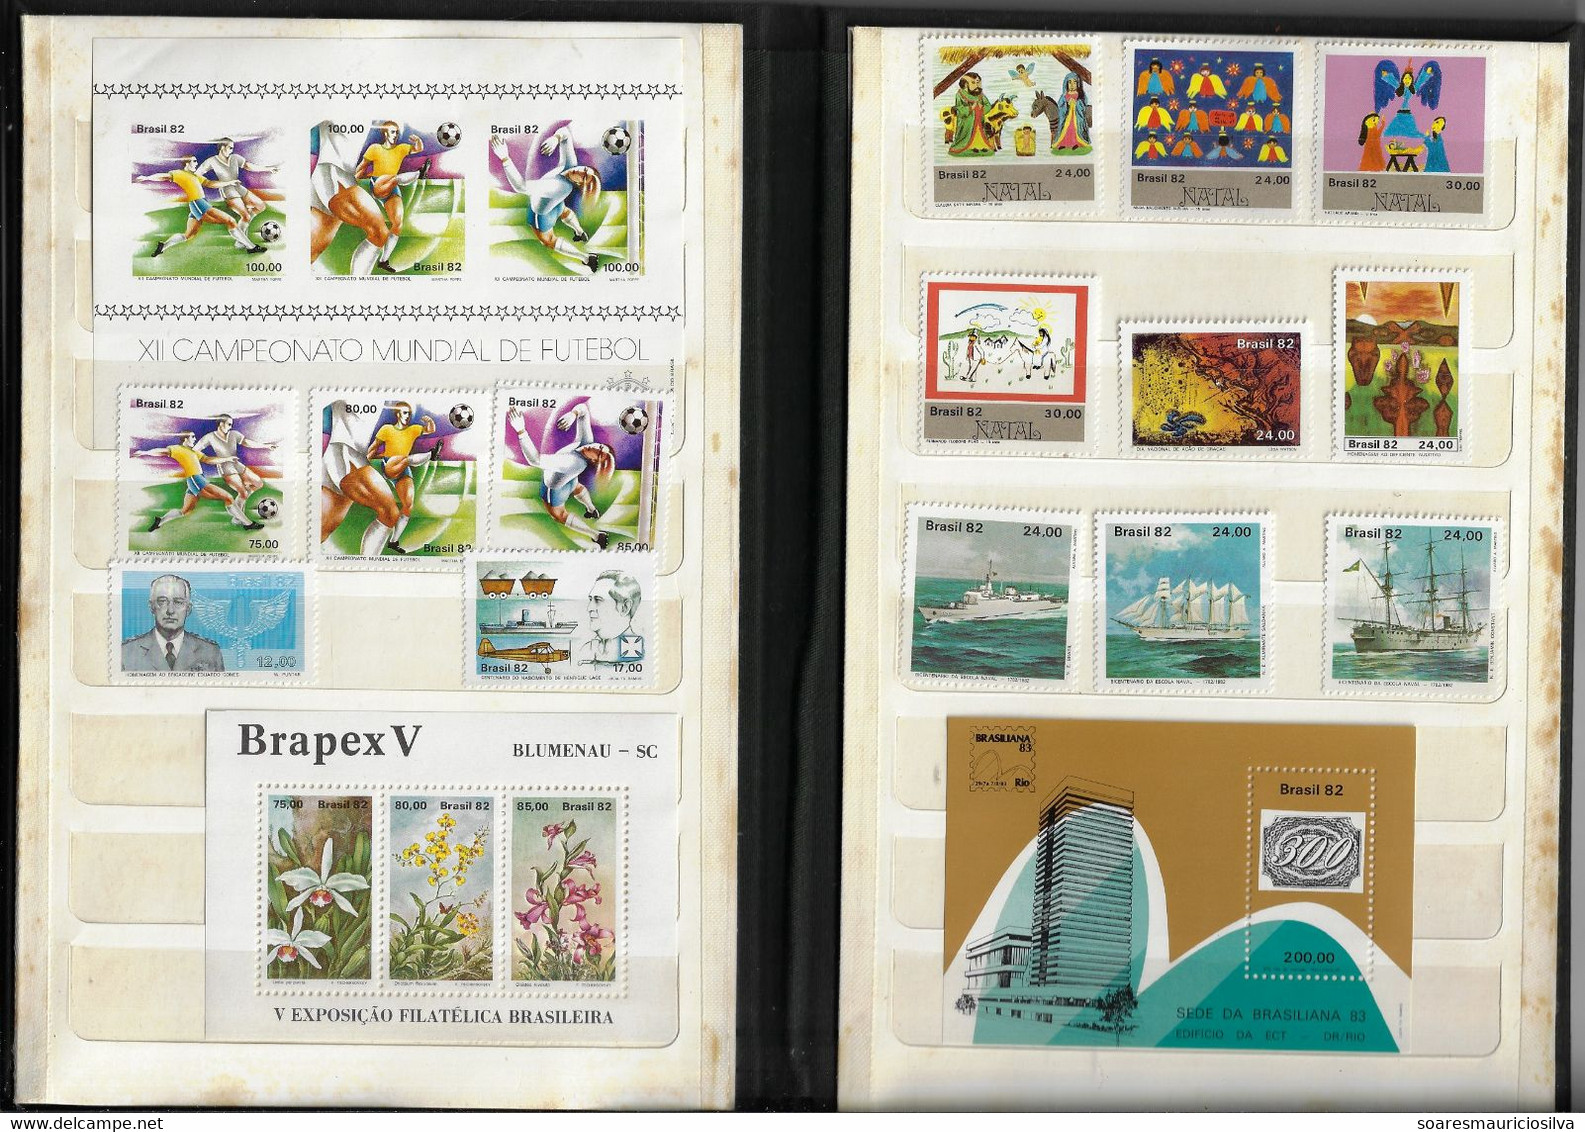 Brazil 1982 Complete Year 52 Commemorative Stamps  + 6 Souvenir Sheets + 12 Definitive Issues Some Yellowish Spots - Annate Complete